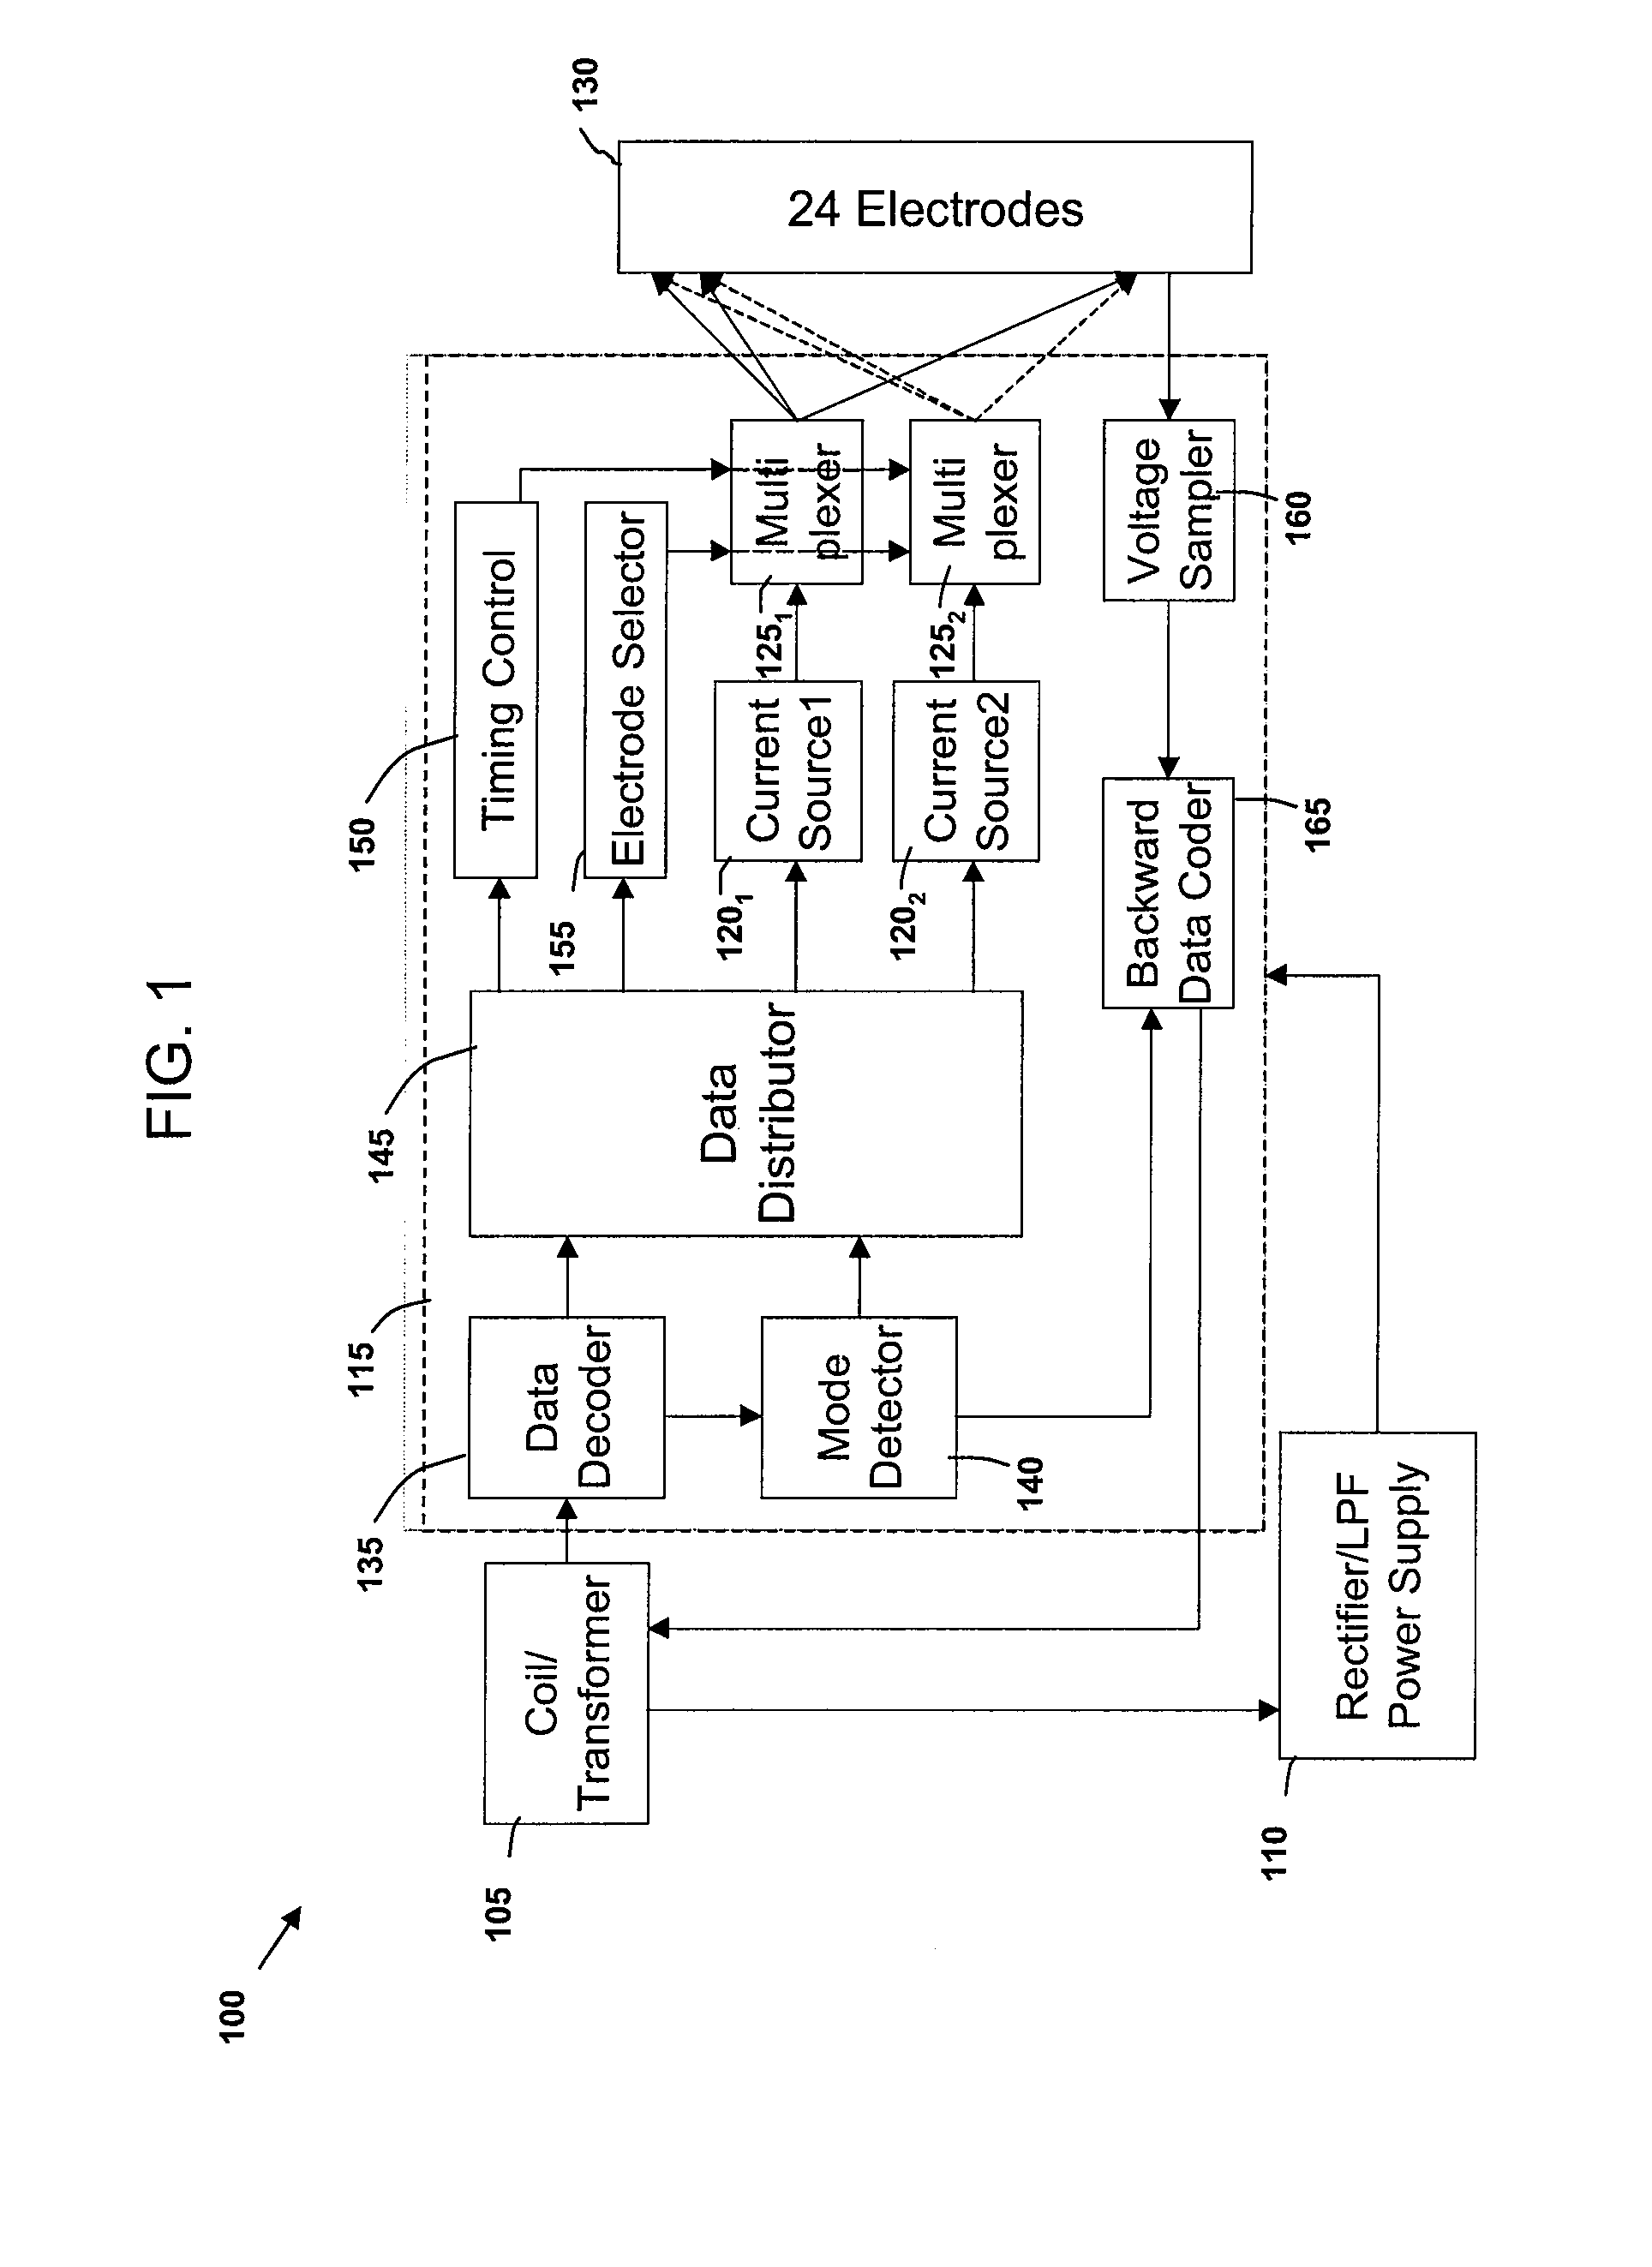 Cochlear implant utilizing multiple-resolution current sources and flexible data encoding